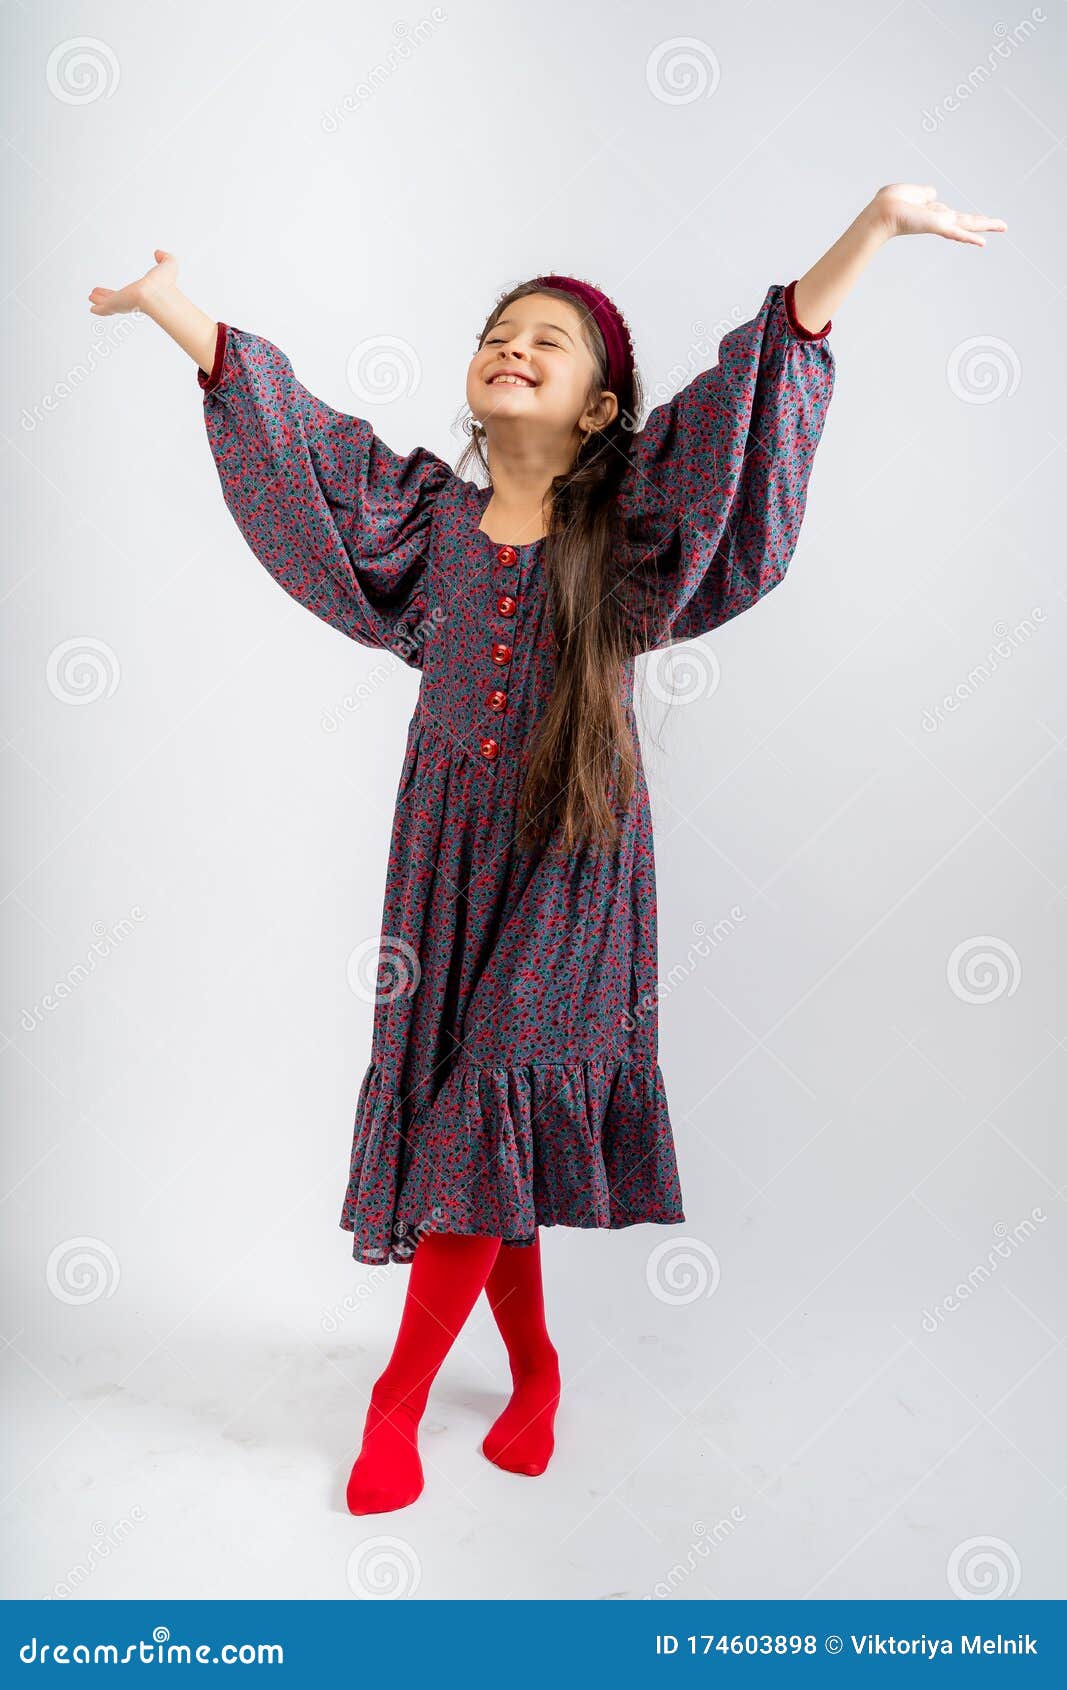 a child in a gray dress with flowers, with red buttons, in red tights,  on a white background.